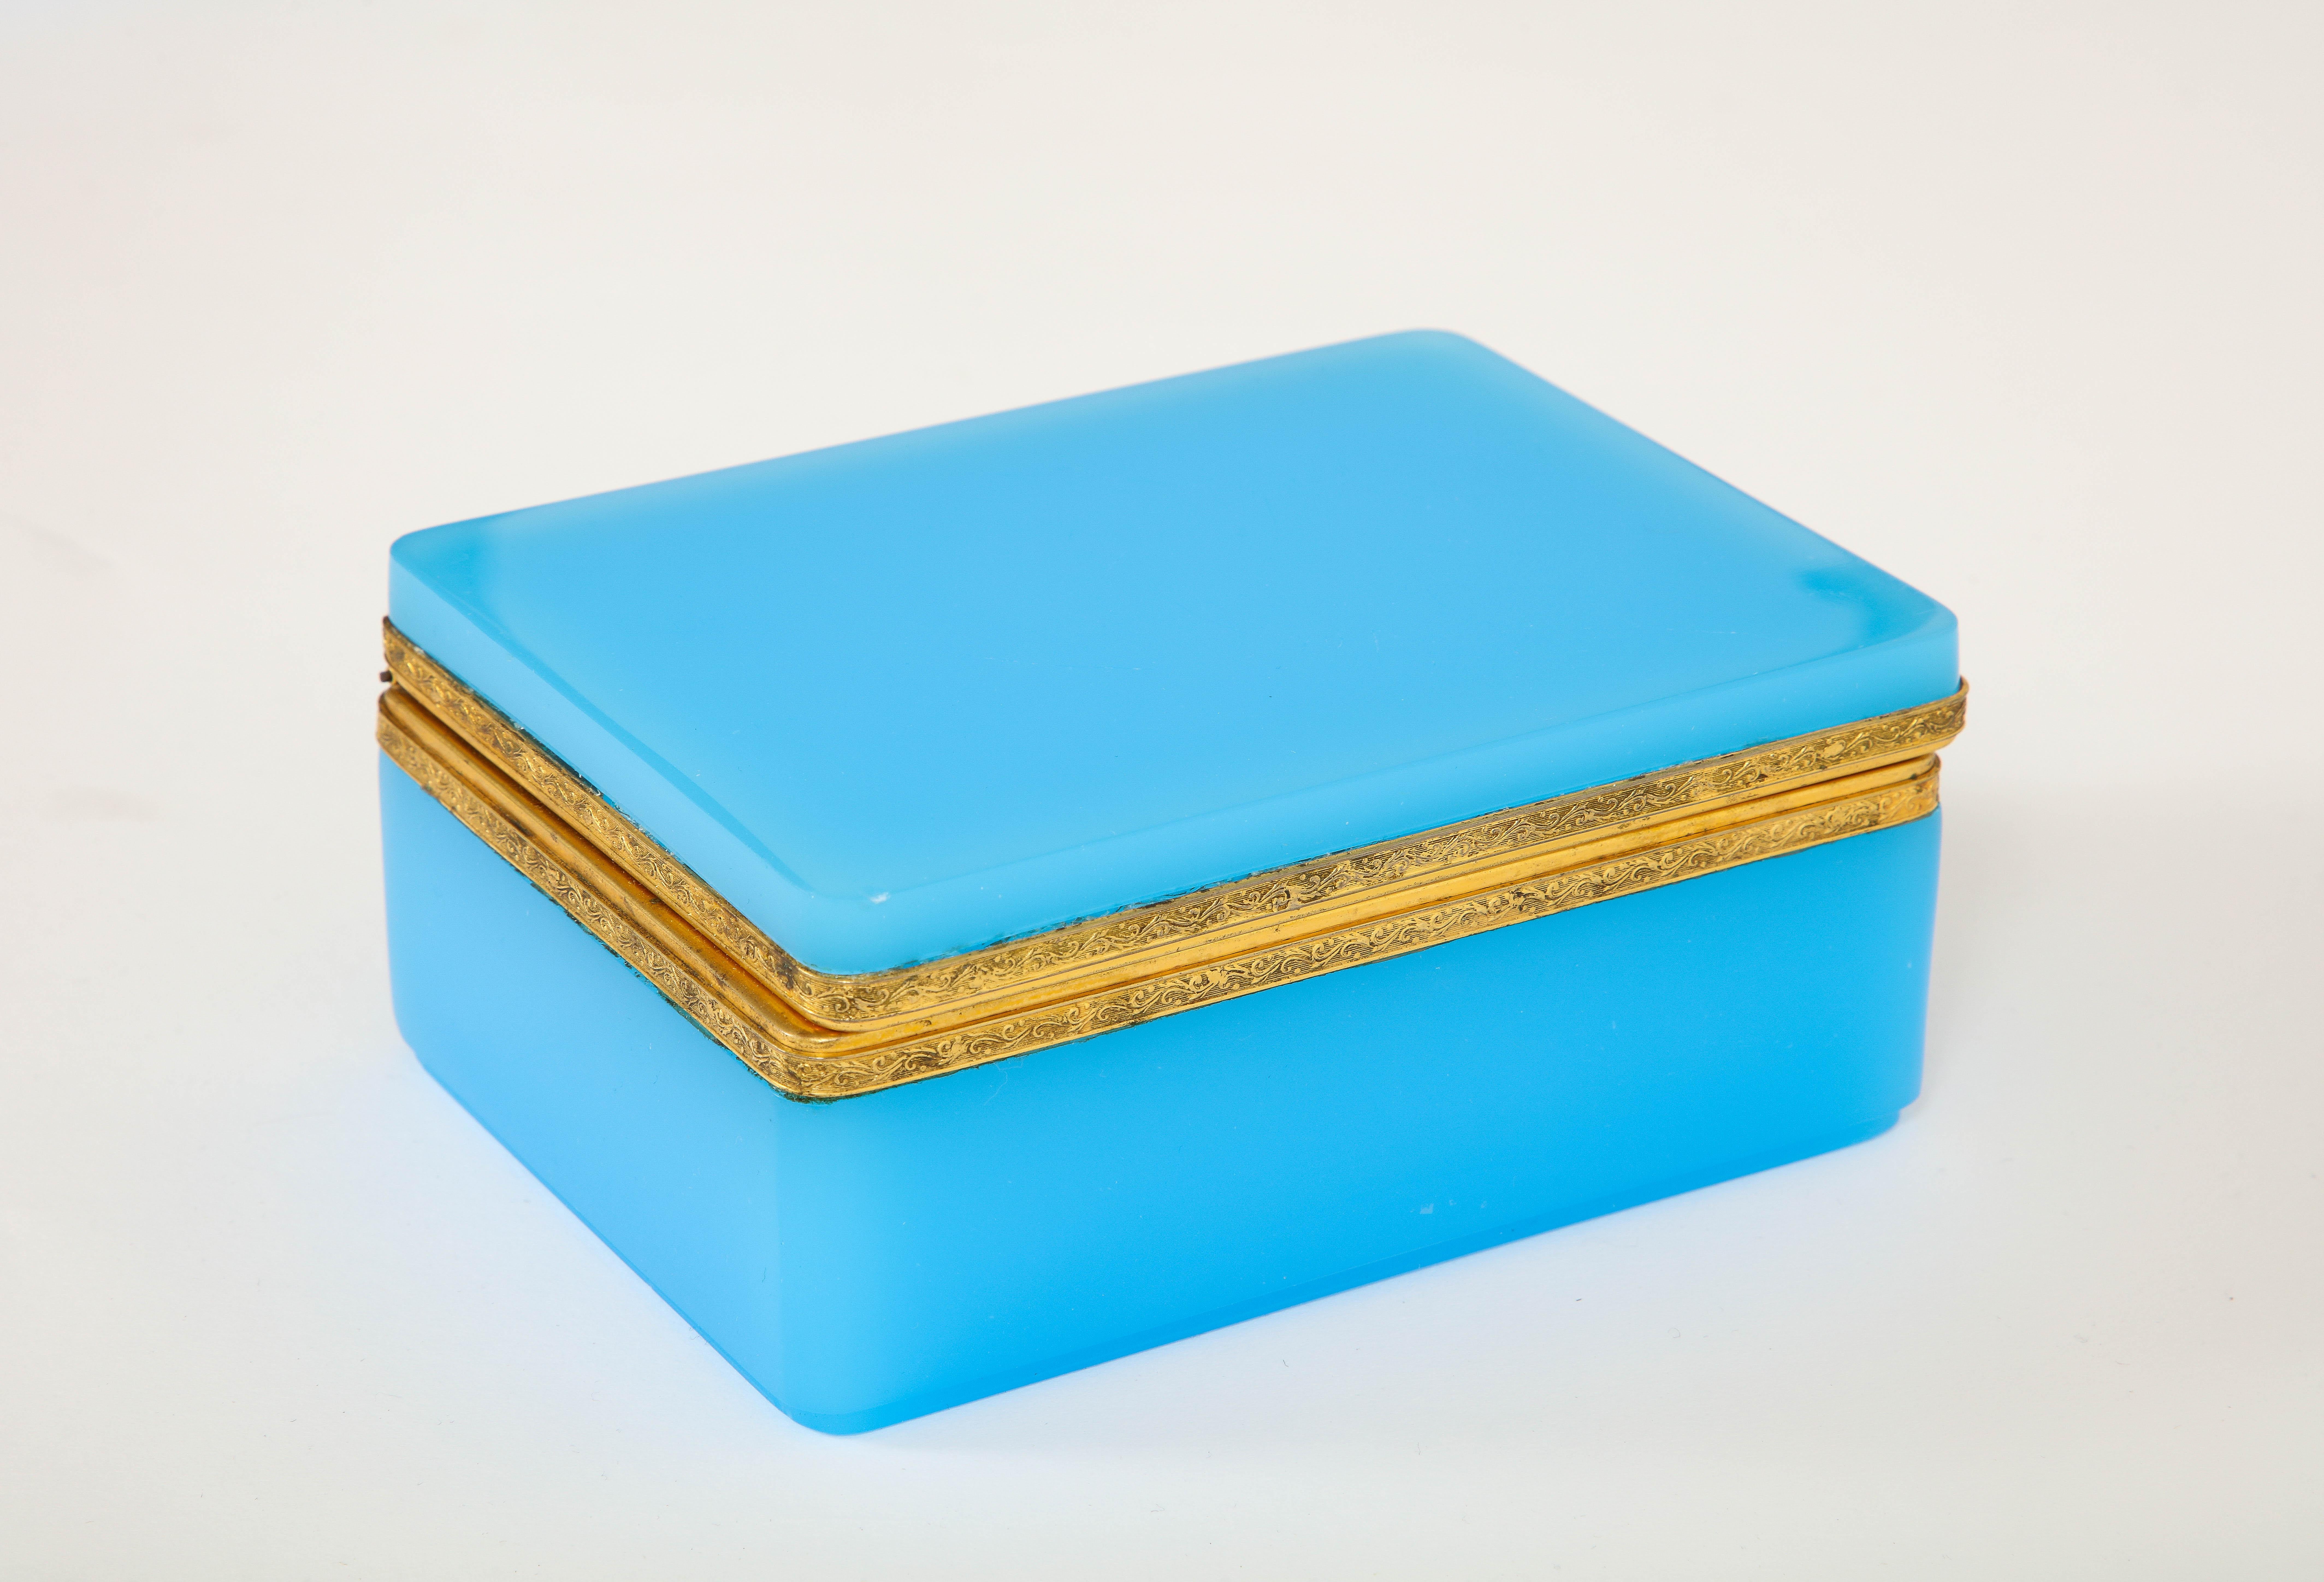 A Fantastic 19th Century French Louis XVI Style Dore Bronze Mounted Blue Opaline Crystal Box.  The box is composed of two sections of French opaline crystal which are mounted to a fabulous dore bronze latch.  The doe bronze is beautifully